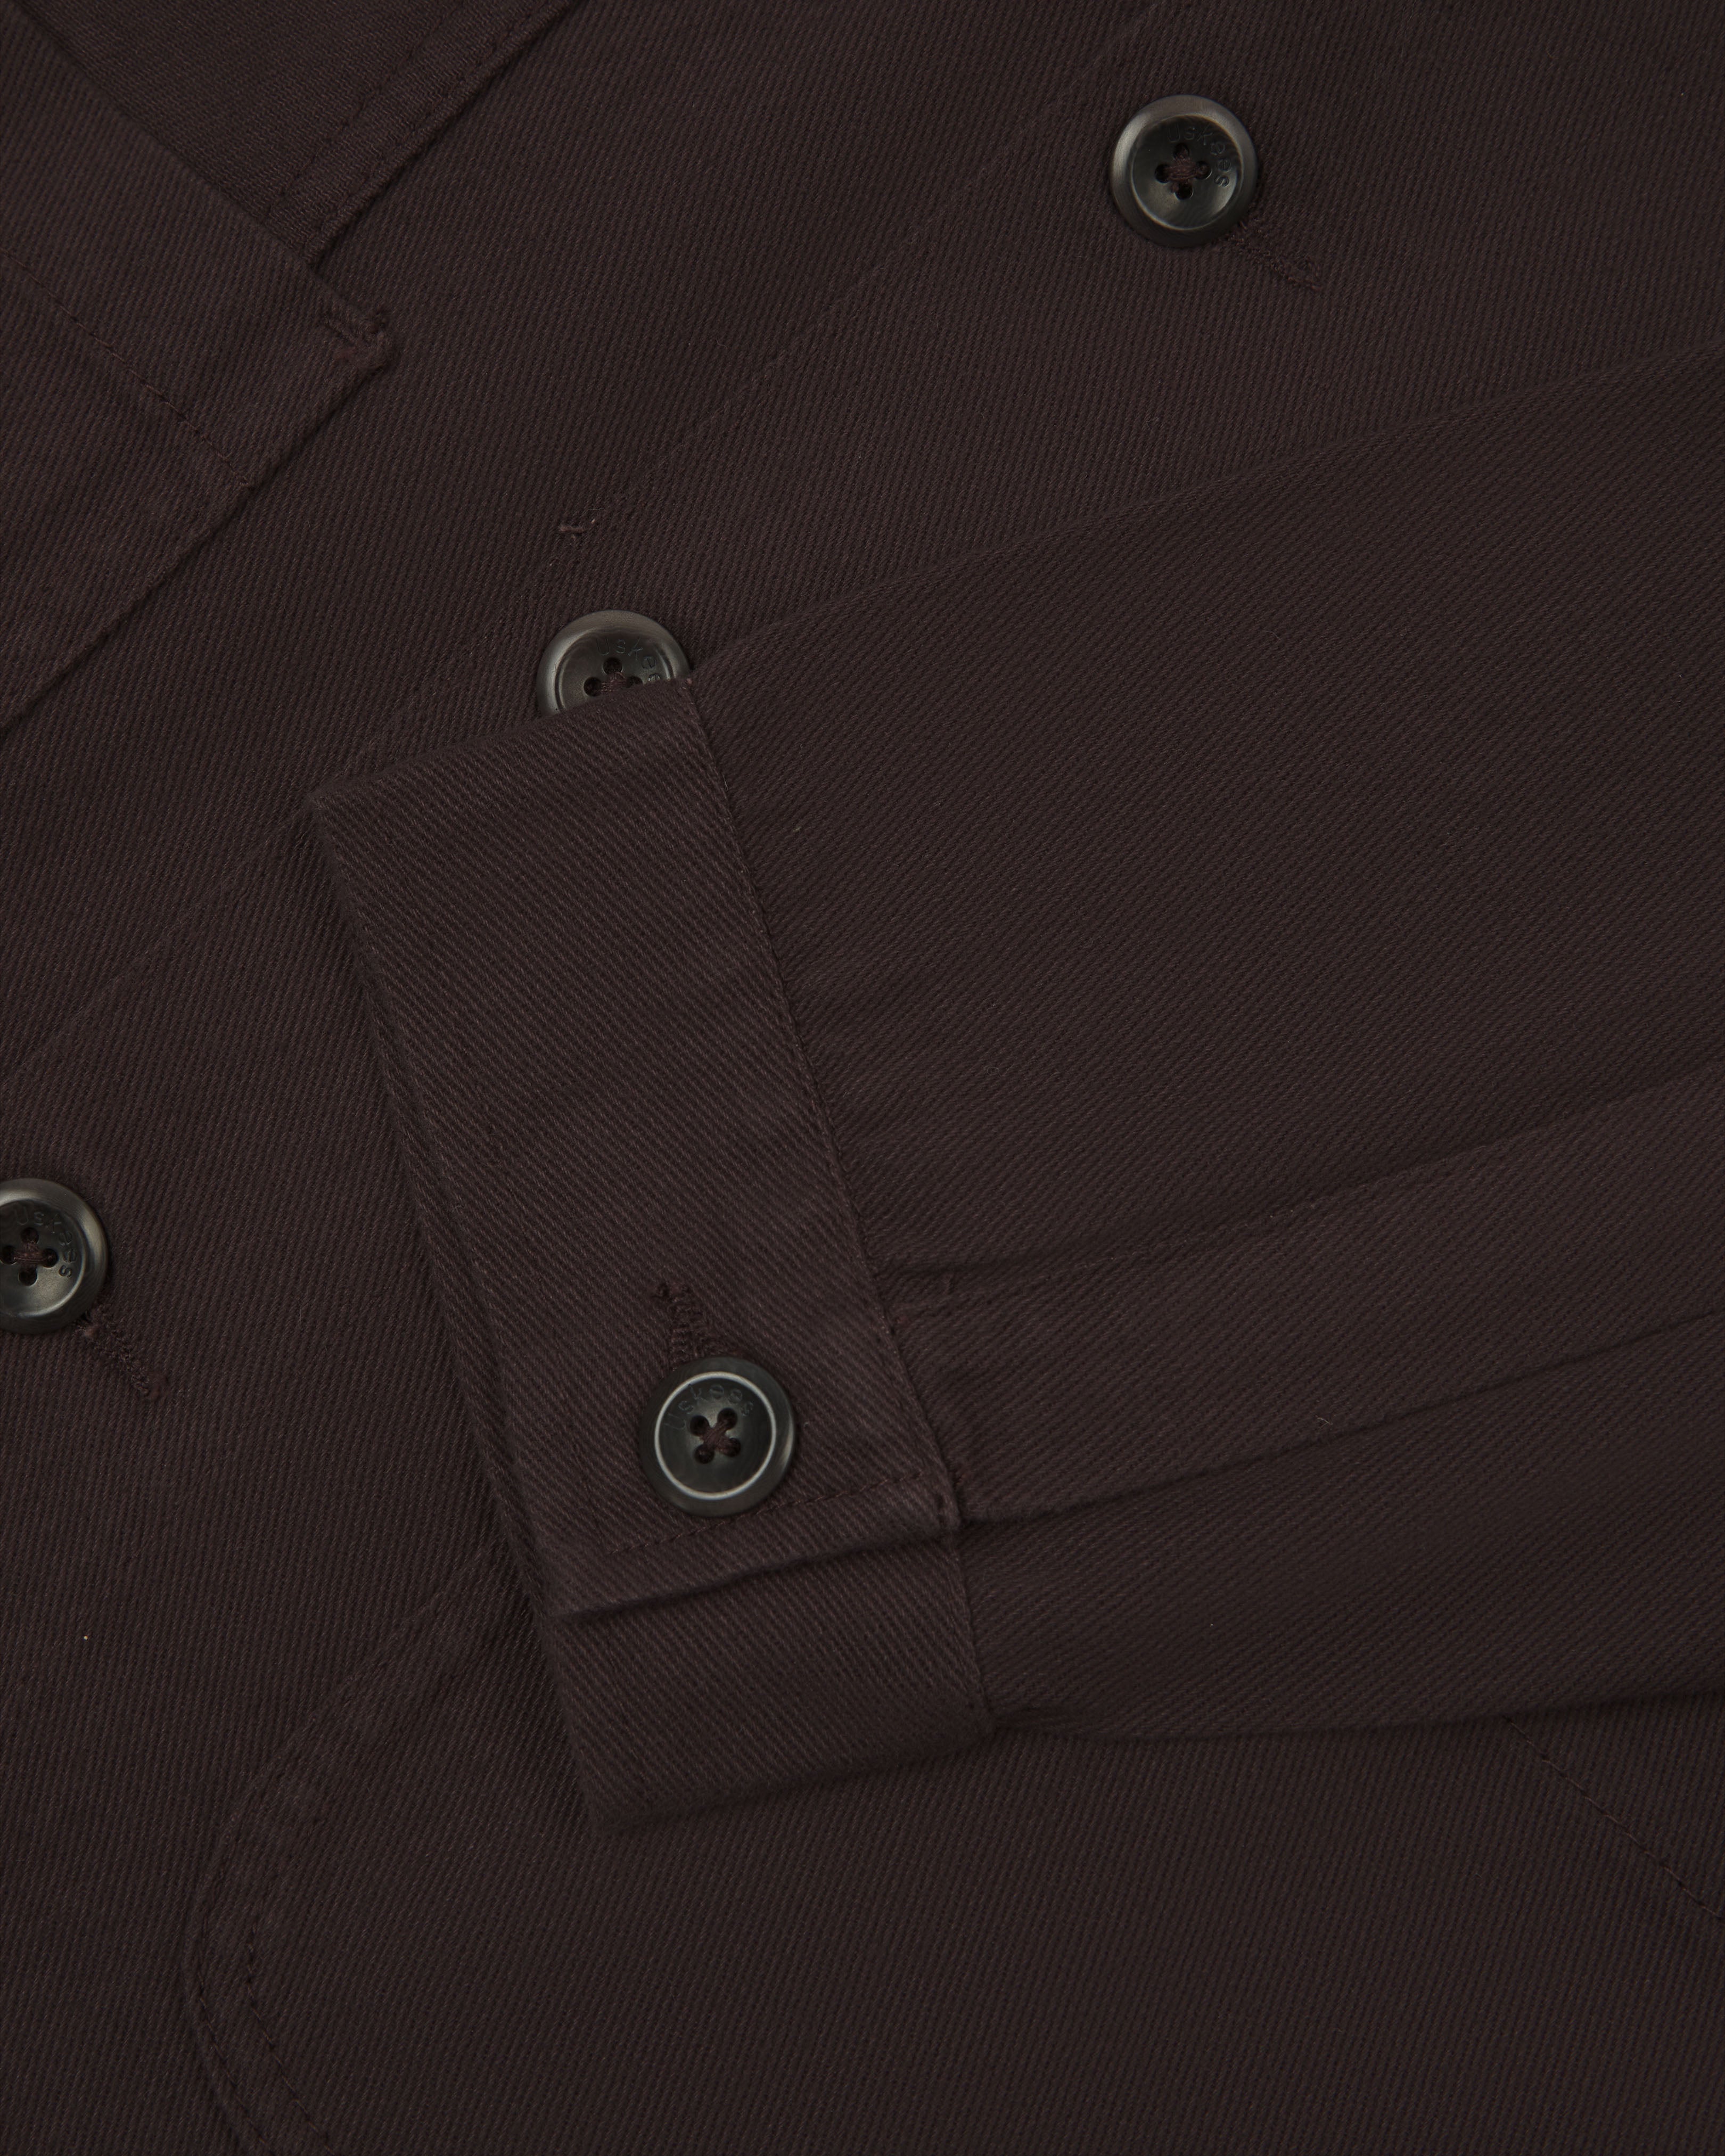 Close-up view of uskees cotton drill overshirt showing front pockets, corozo buttons and sleeve/cuff detail.